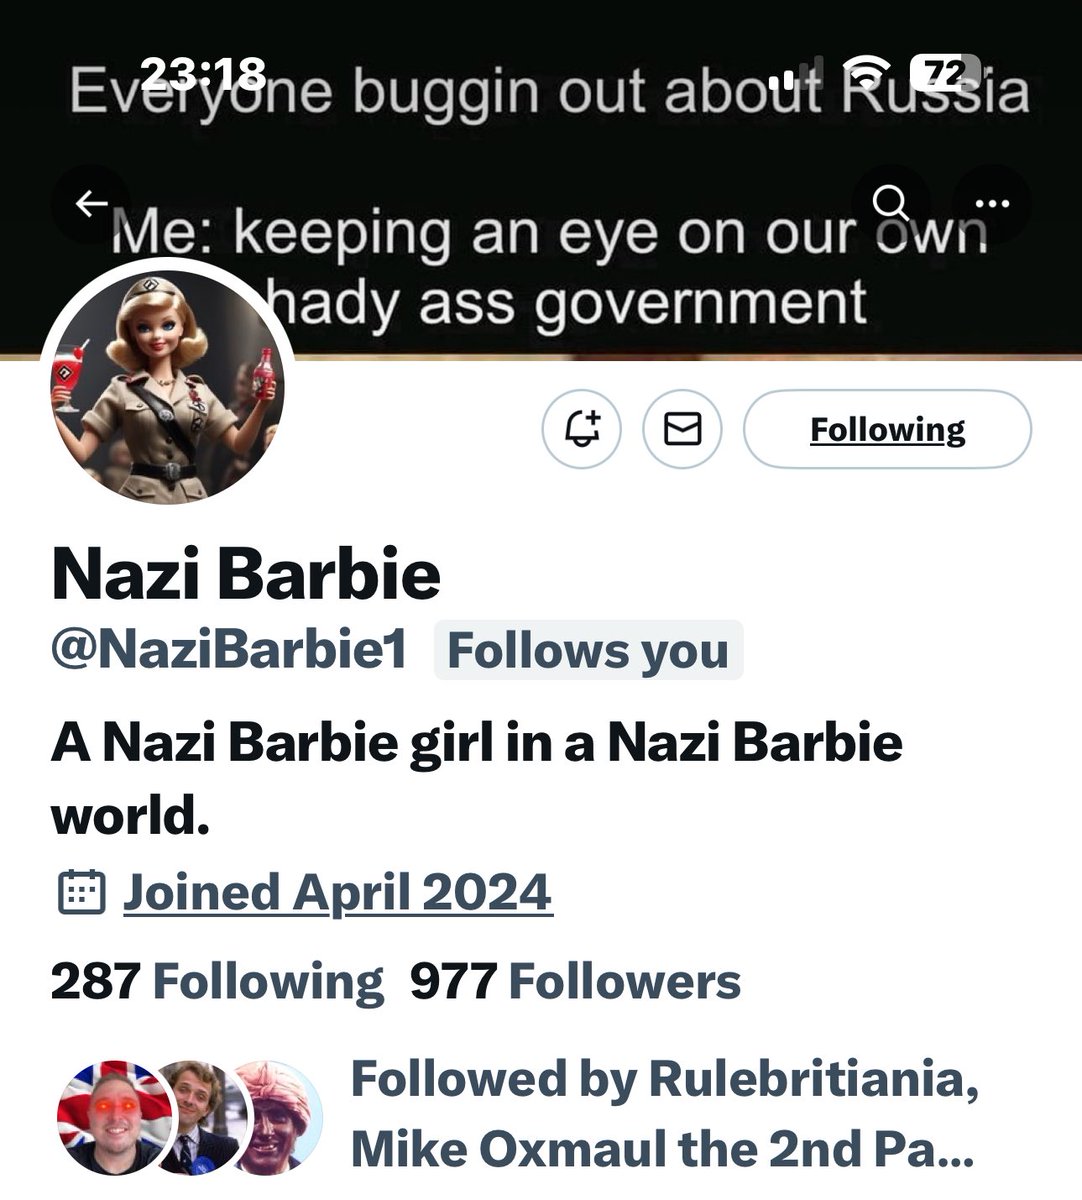 This is my alt account. @NaziBarbie1 Give it a follow, as I won’t be around on this one forever! I named myself after what the left love to call me. 😜 I’ll follow all back slowly, don’t want to upset the algorithm 🏴󠁧󠁢󠁥󠁮󠁧󠁿🏴󠁧󠁢󠁥󠁮󠁧󠁿🏴󠁧󠁢󠁥󠁮󠁧󠁿🏴󠁧󠁢󠁥󠁮󠁧󠁿🏴󠁧󠁢󠁥󠁮󠁧󠁿🏴󠁧󠁢󠁥󠁮󠁧󠁿🏴󠁧󠁢󠁥󠁮󠁧󠁿🏴󠁧󠁢󠁥󠁮󠁧󠁿🏴󠁧󠁢󠁥󠁮󠁧󠁿